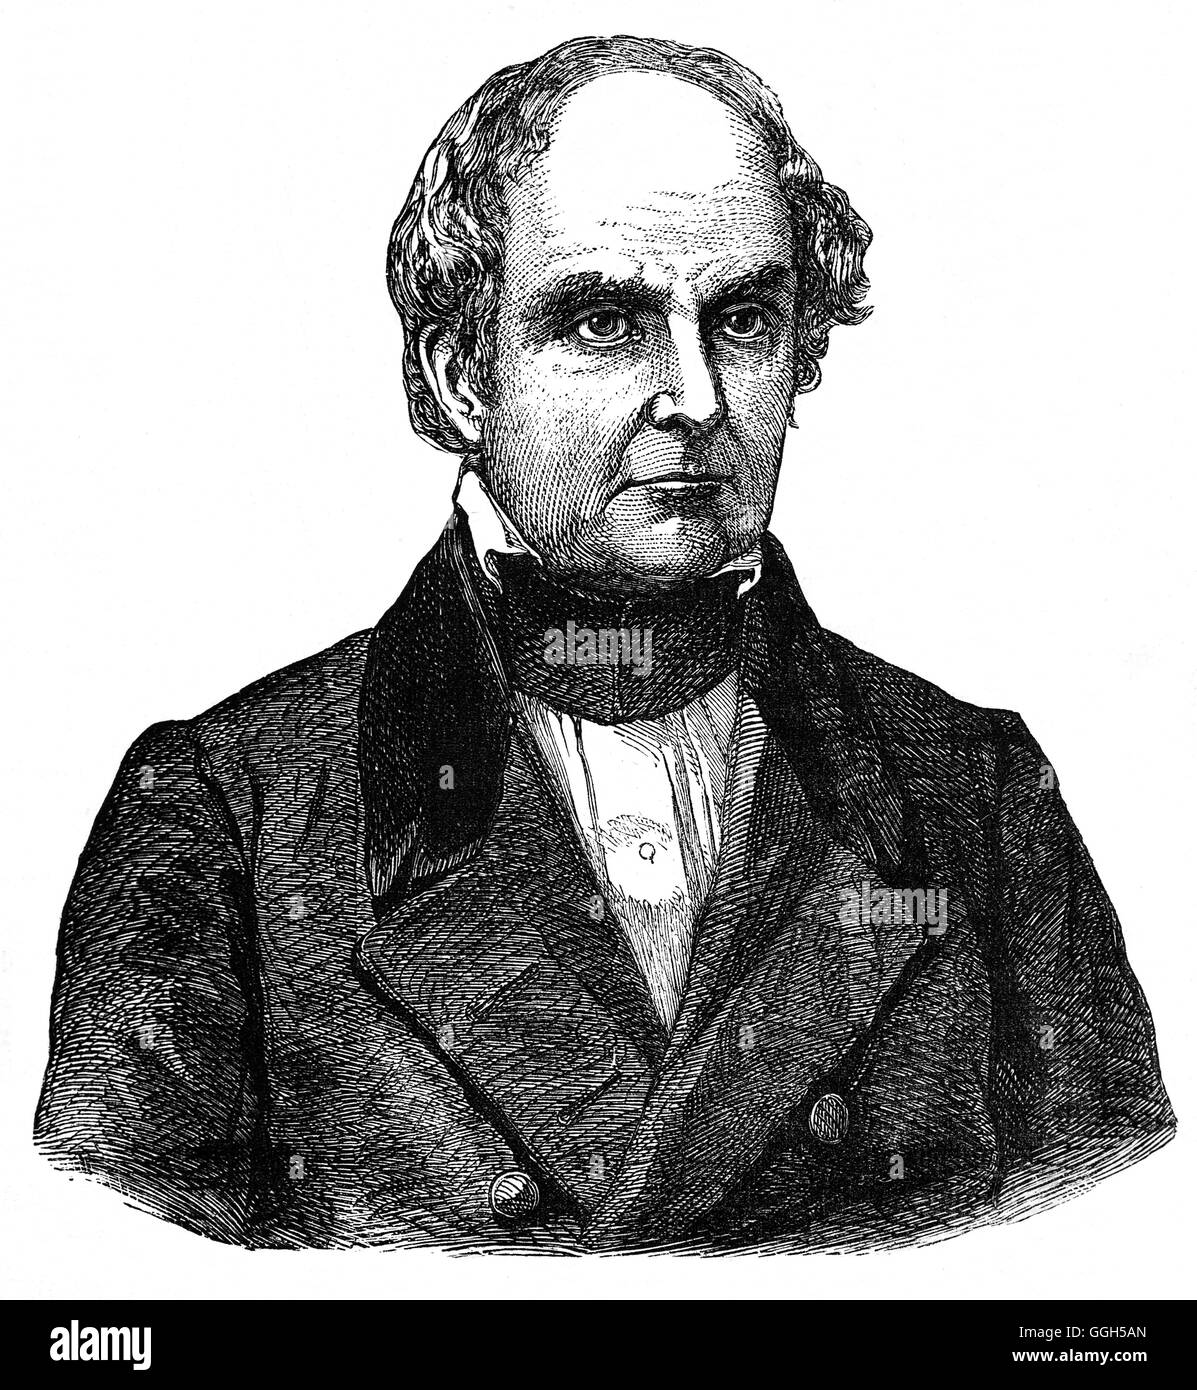 Daniel Webster (1782 – 1852) was an American statesman and one of the highest-regarded courtroom lawyers of the era. He is best known for negotiating the Webster–Ashburton Treaty of 1842 with Great Britain which established the definitive eastern border between the United States and Canada. Stock Photo